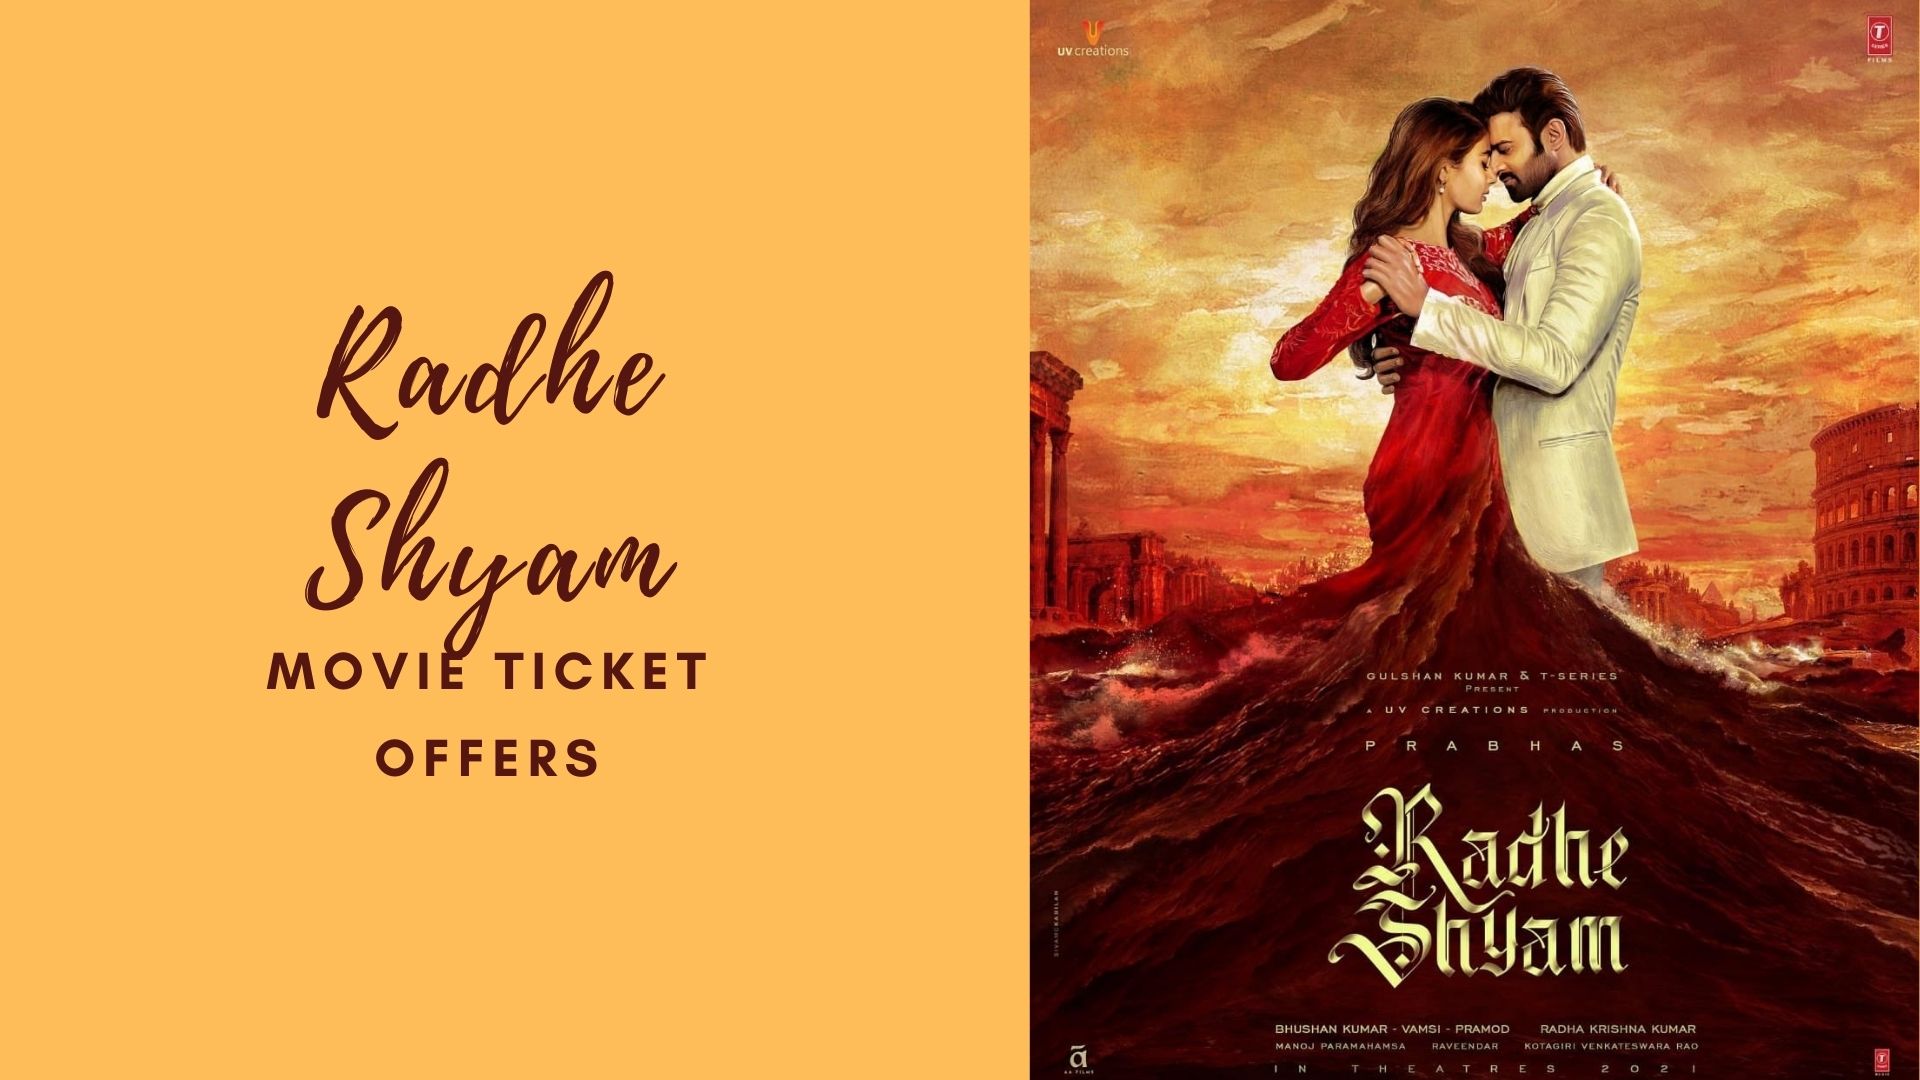 Radhe Shyam Movie Ticket Offers: Release Date, Trailer, Cast And More